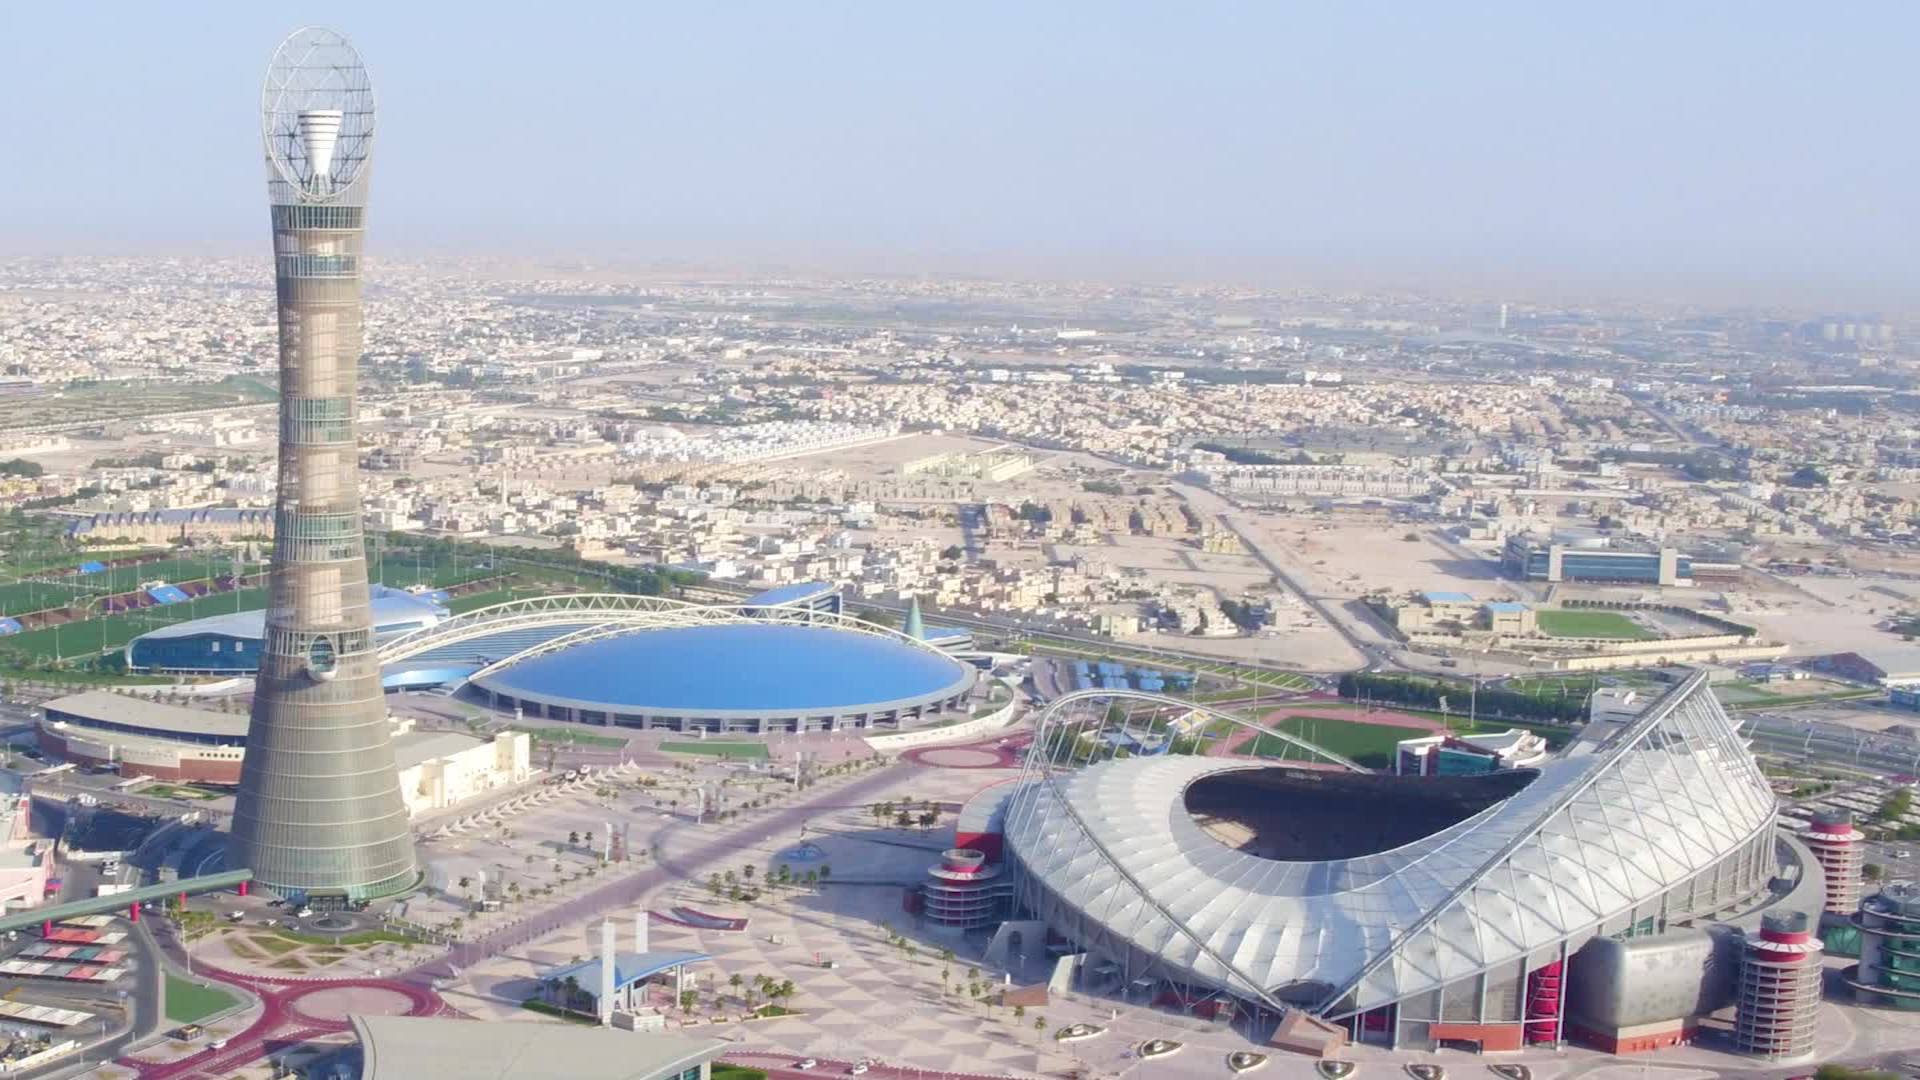 World Cup: After success of Qatar 2022, Fifa readies itself for 48-team  tournament in North